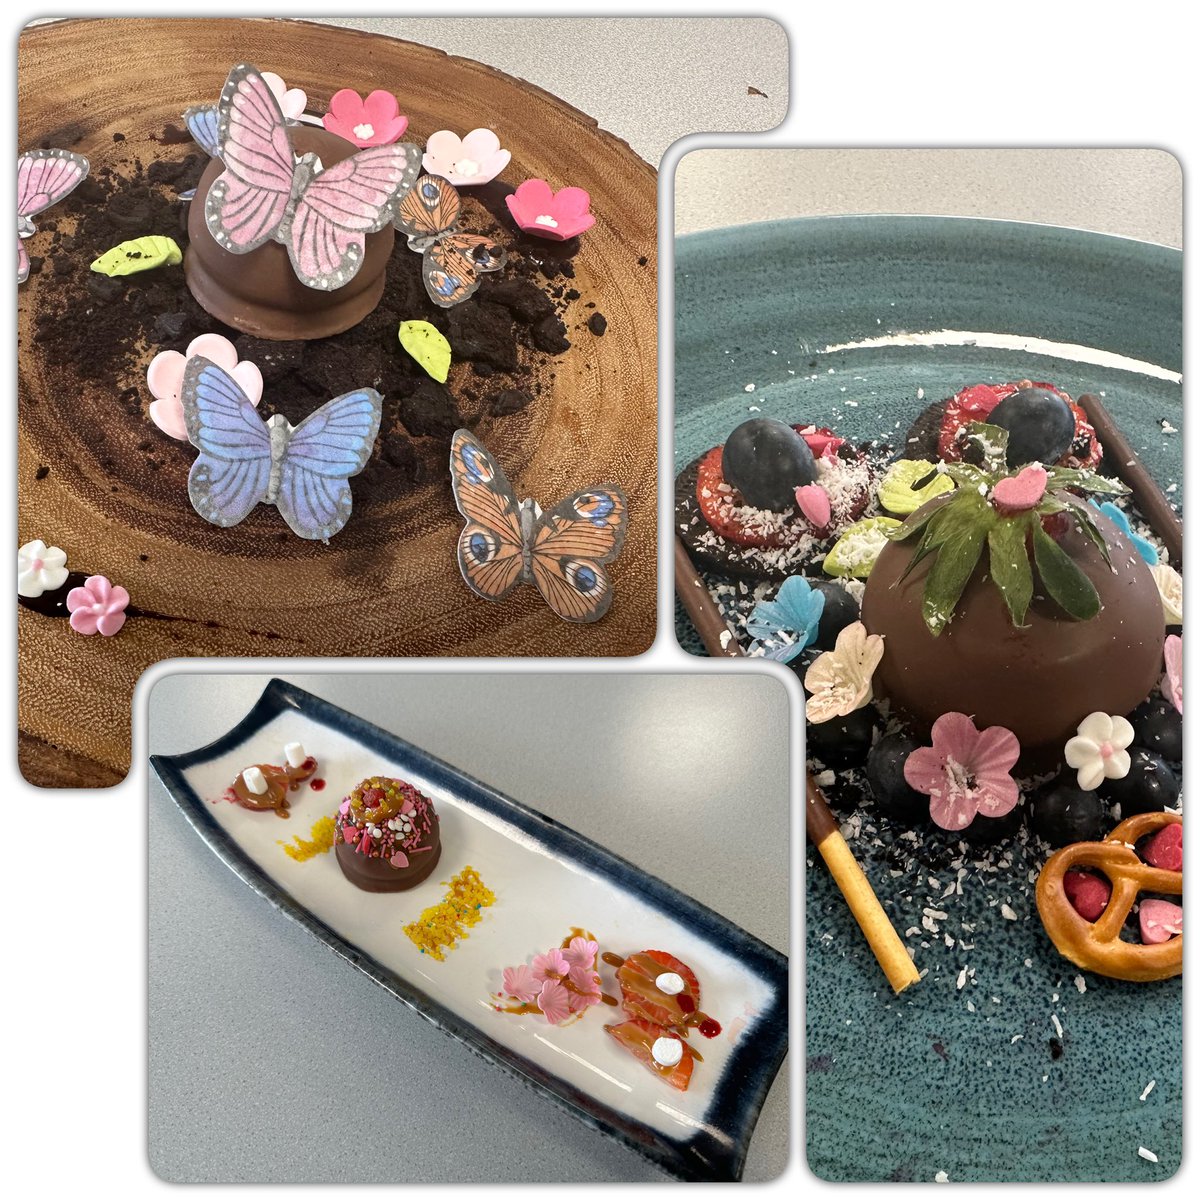 Y10 have had fun this week focusing on plate presentation and ‘disguising’ their tea cakes in the themes of earth, wind, water or fire. #competition